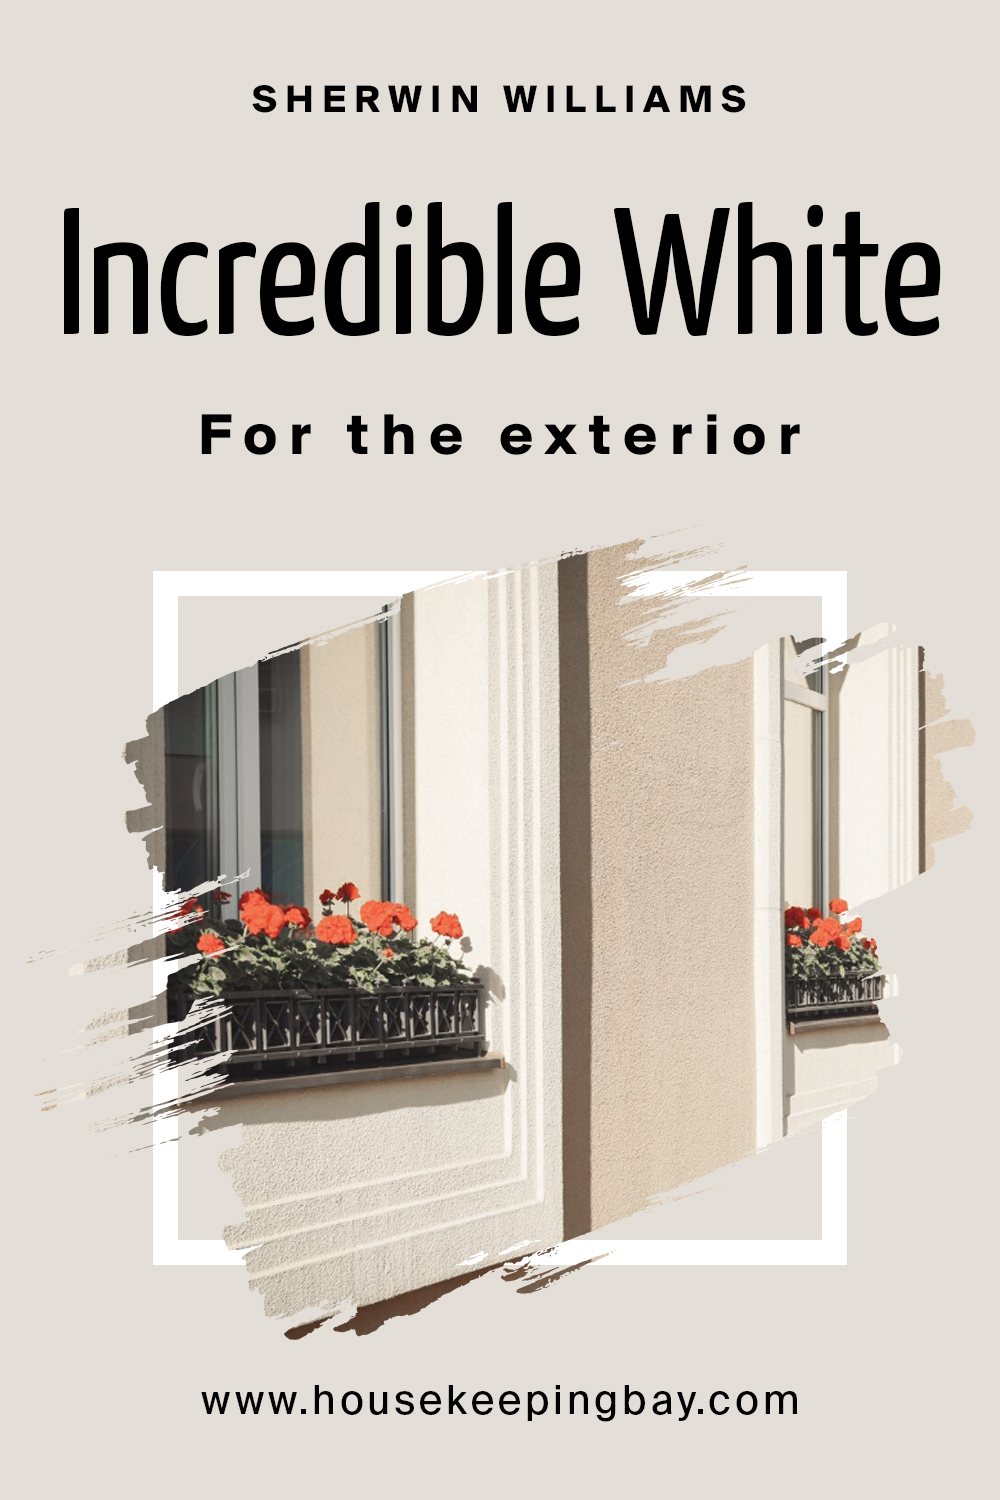 Sherwin Williams. Incredible White For the exterior